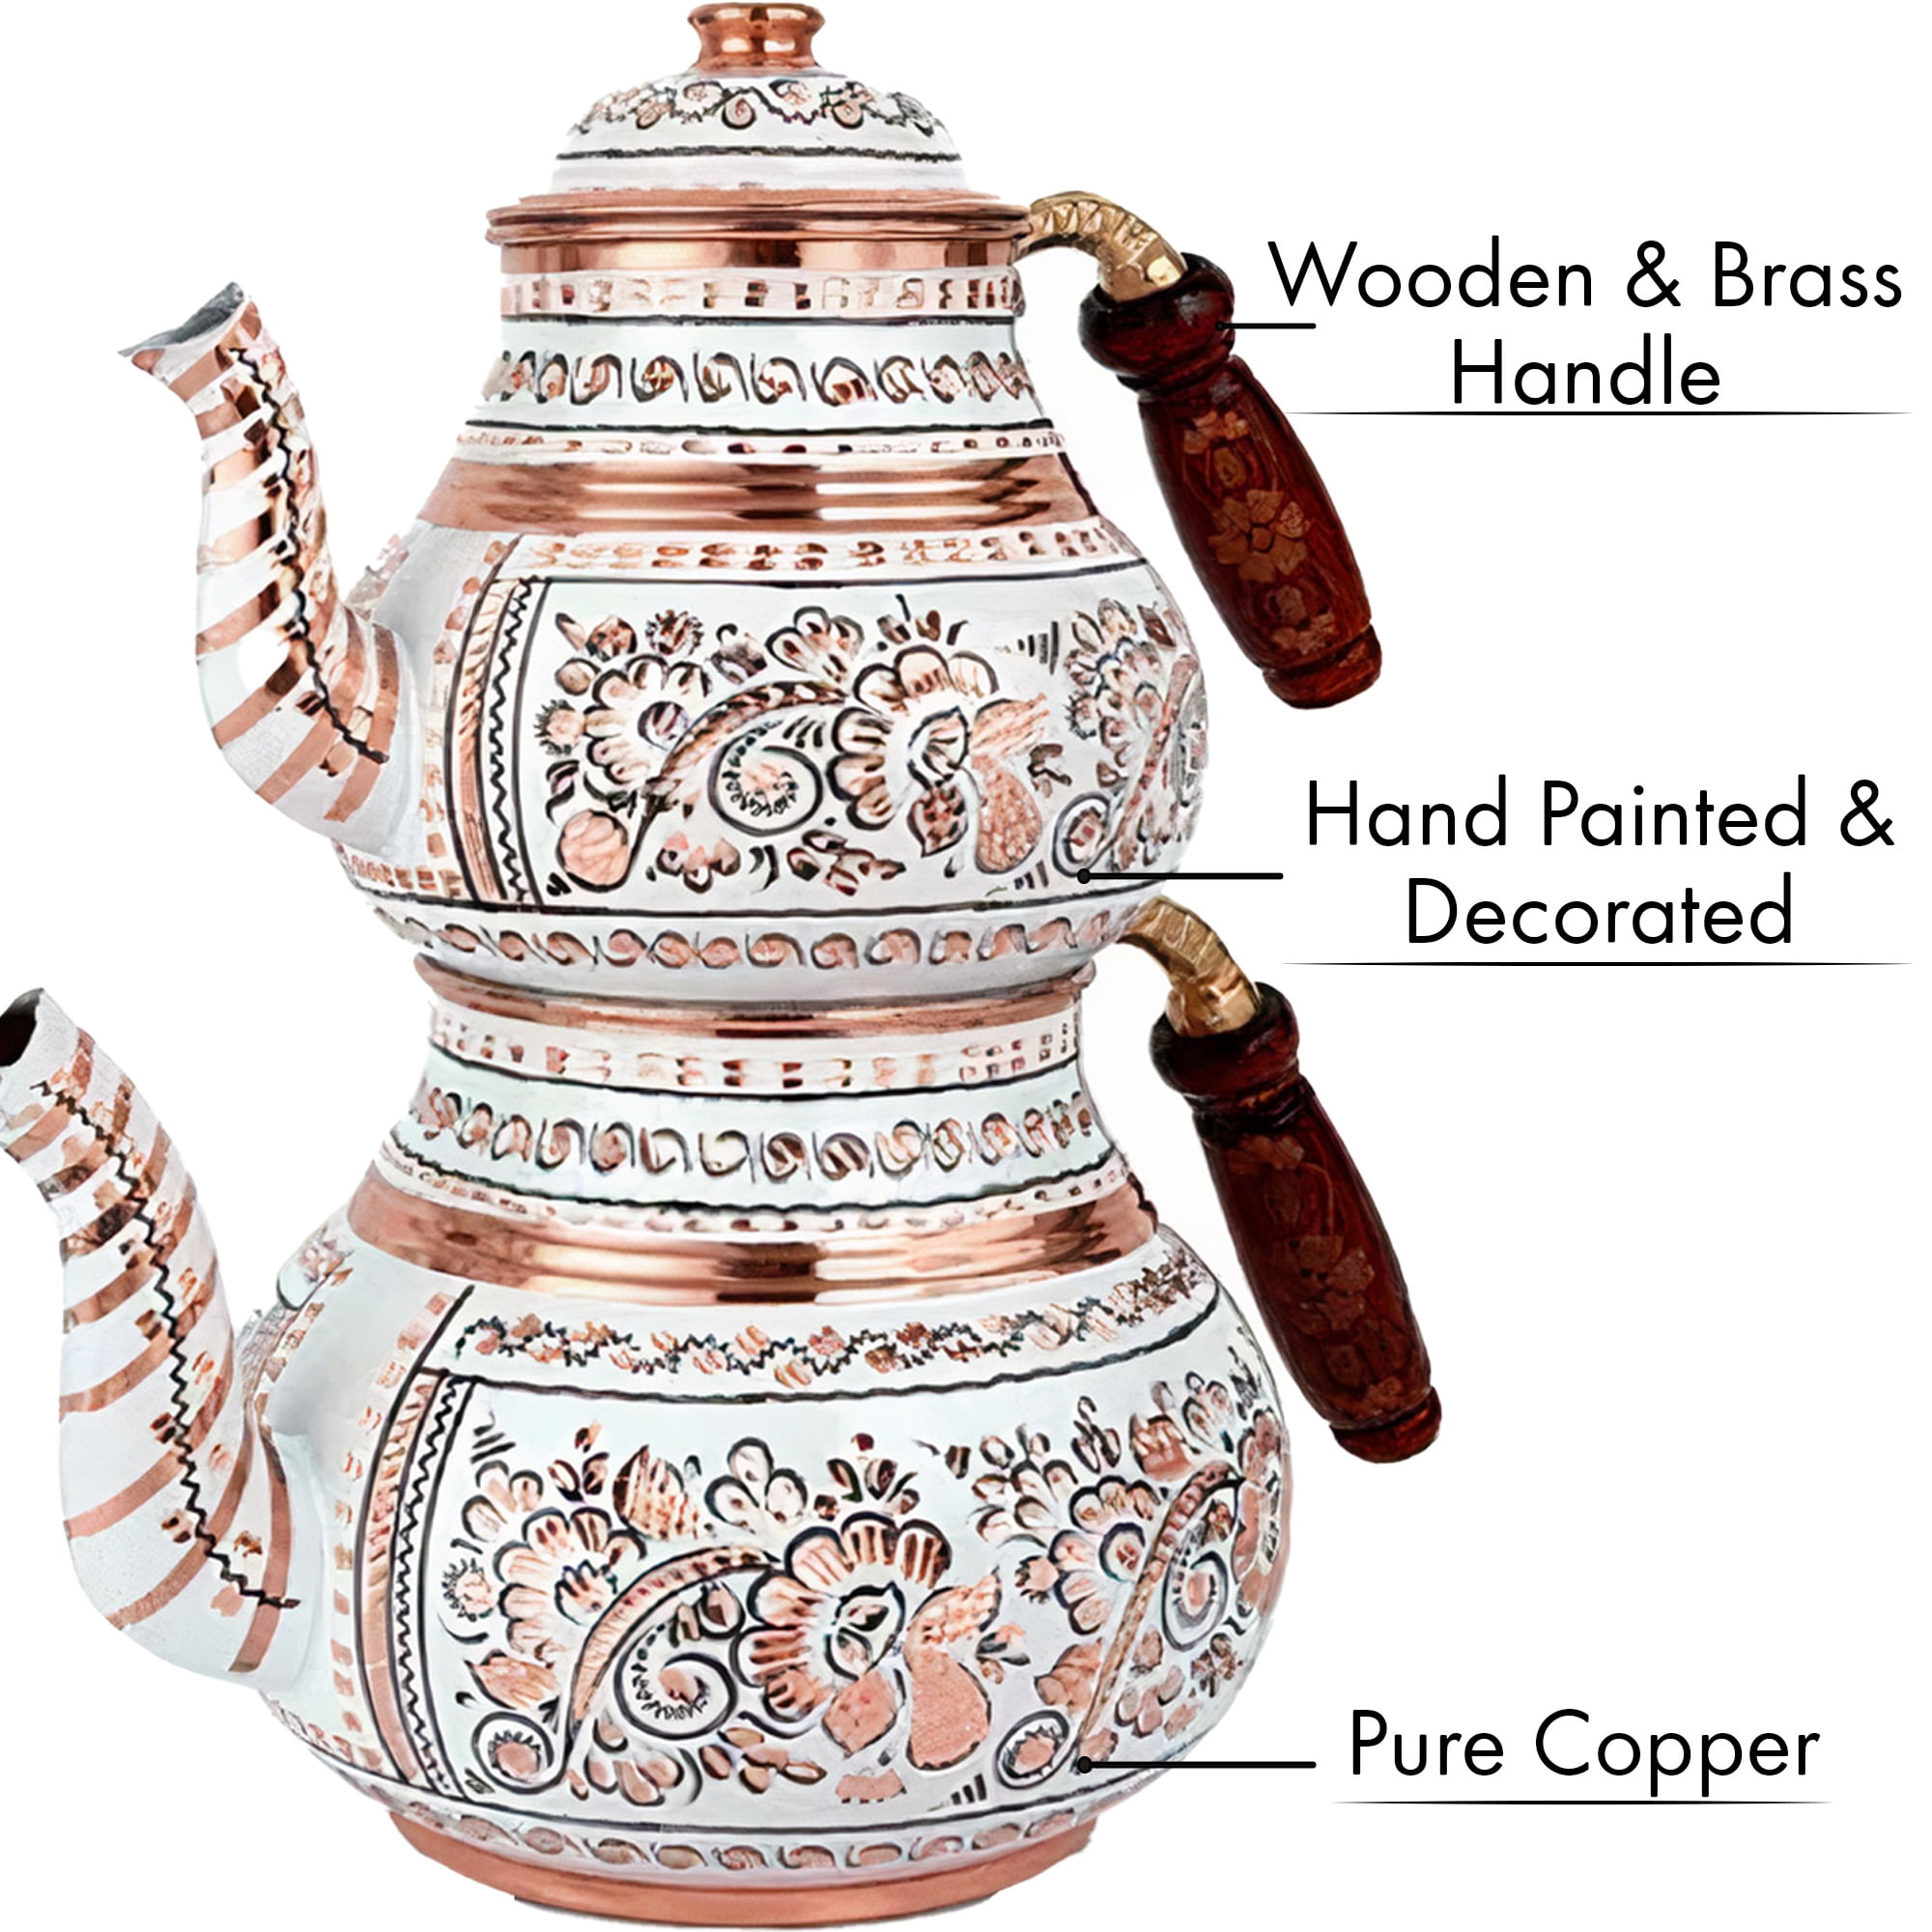 Handmade Copper Turkish Tea Pots, Thickest Copper Double Teapot Set for  Stovetop, Decorated and Painted Samovar Style Vintage Tea Kettle Pot with  Brass and Wooden Handle 